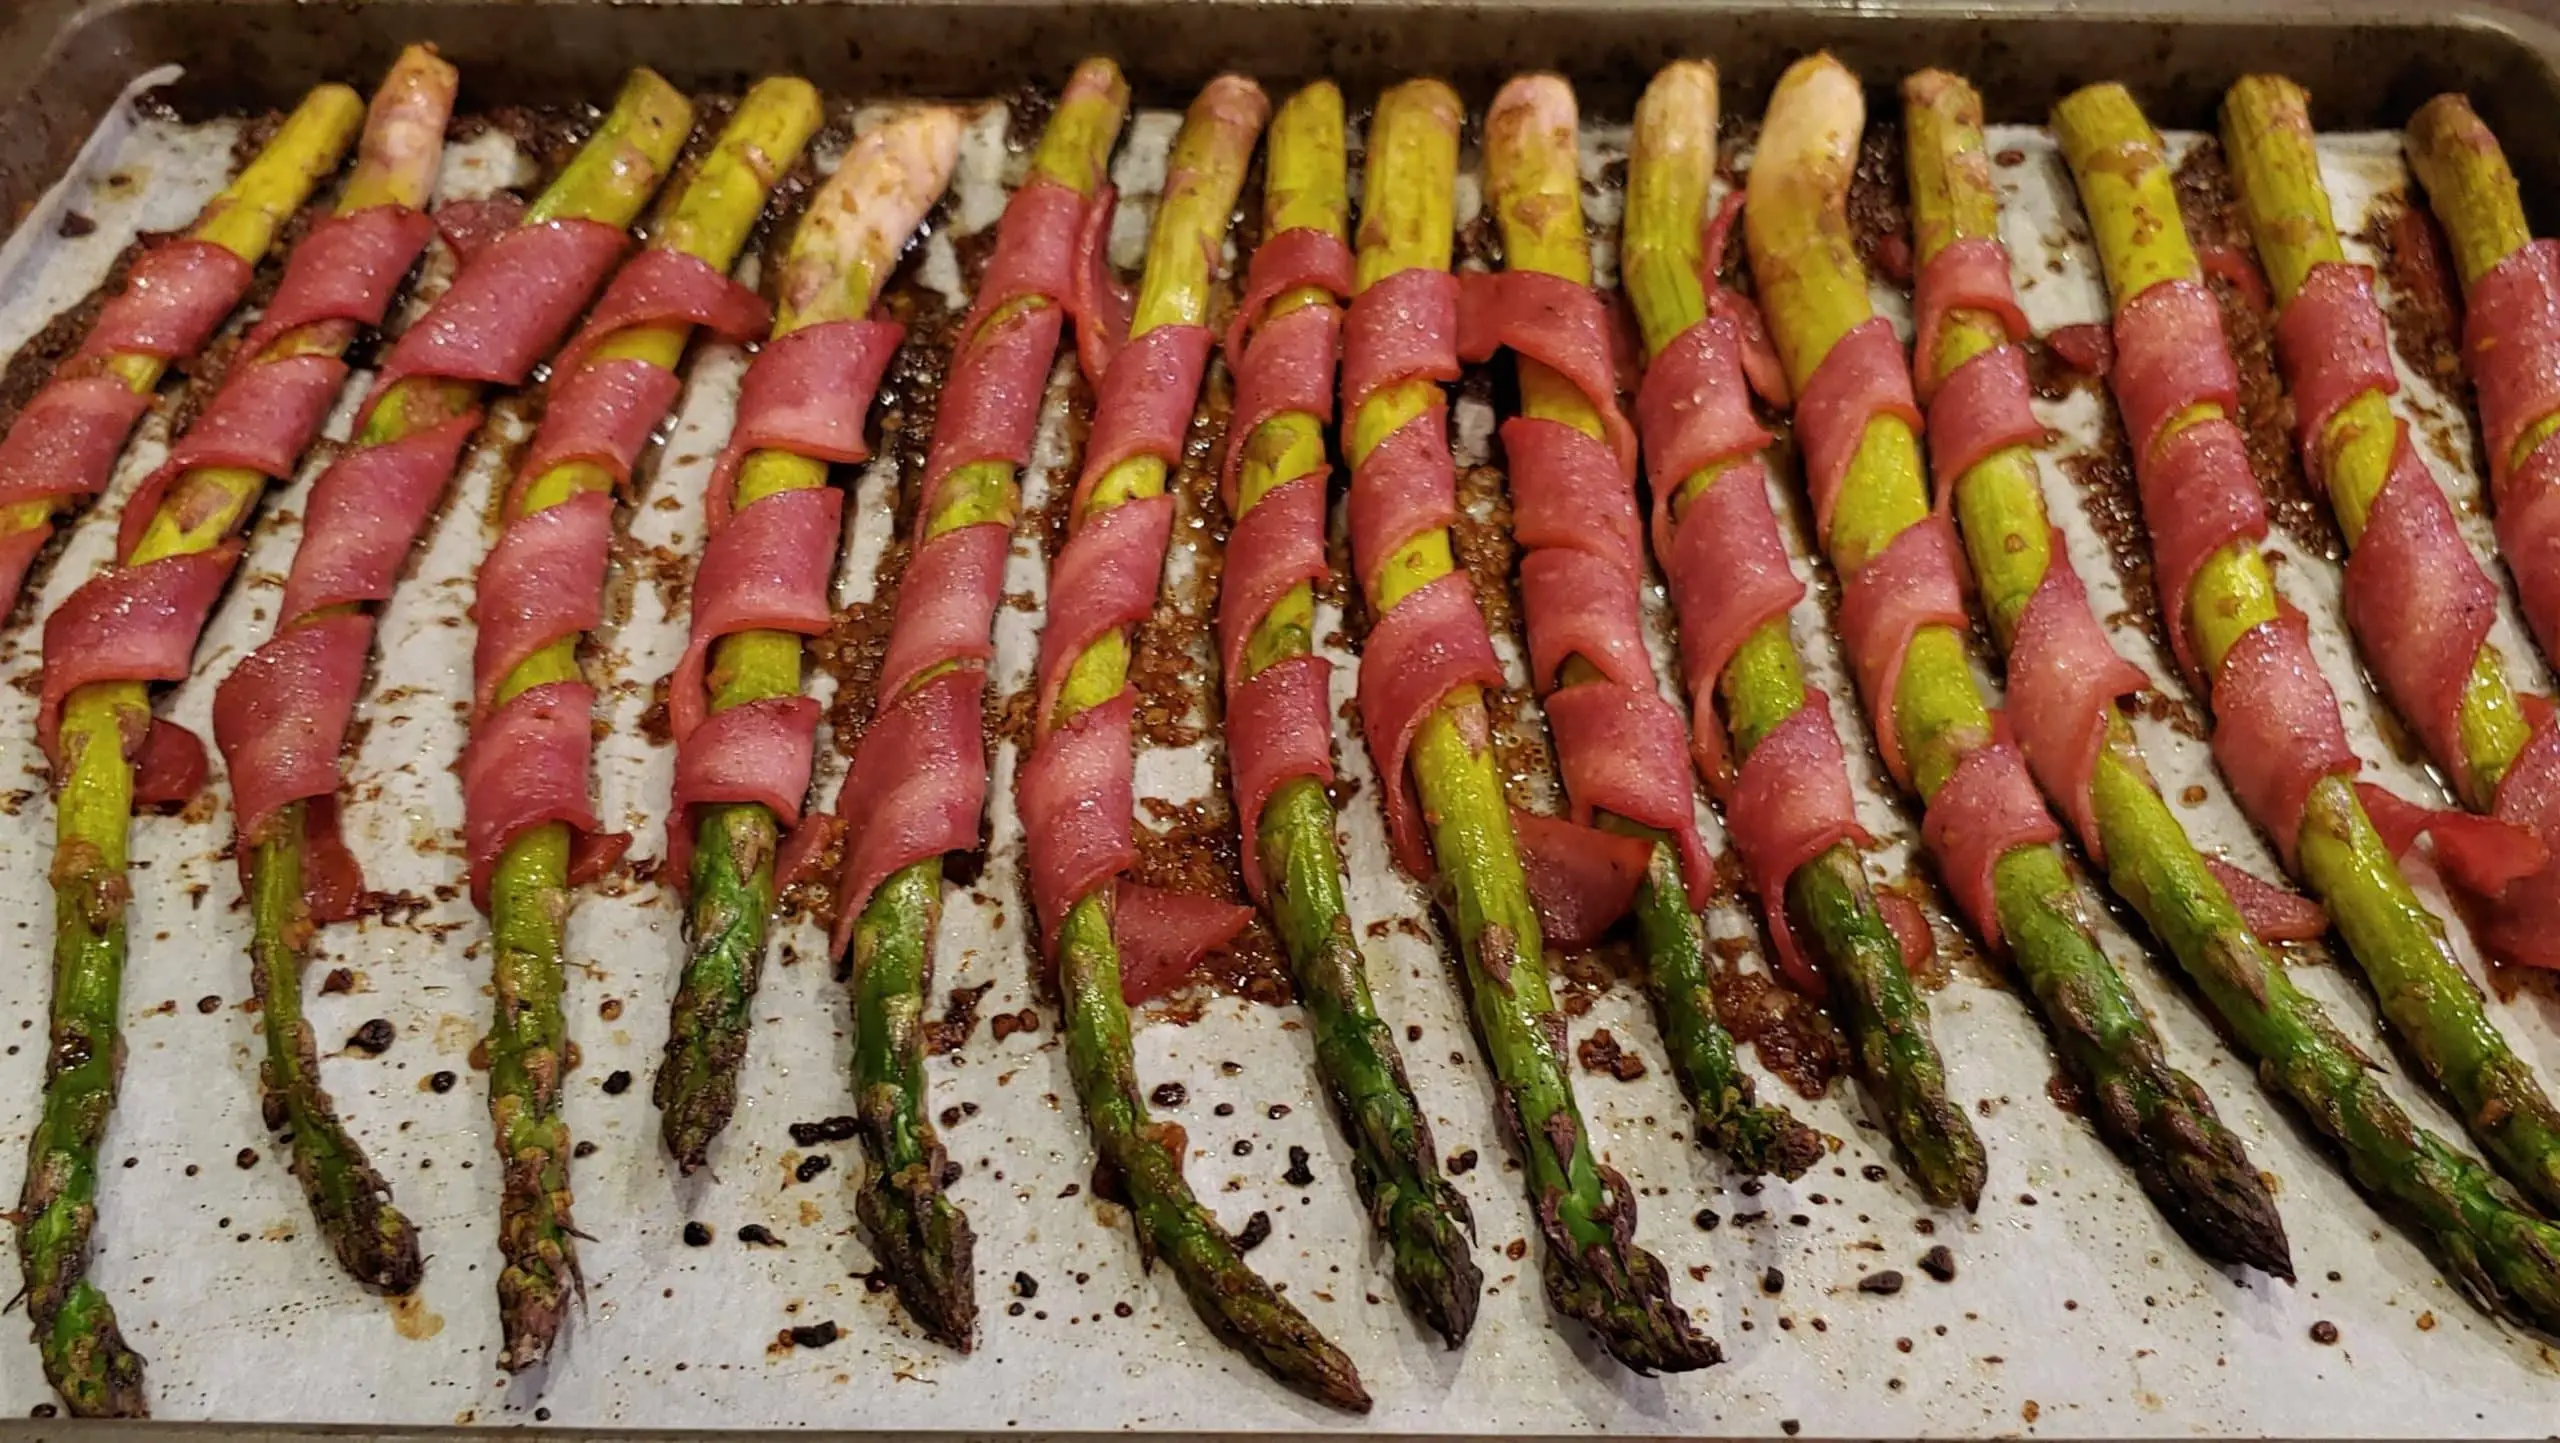 Asparagus - Dining in with Danielle